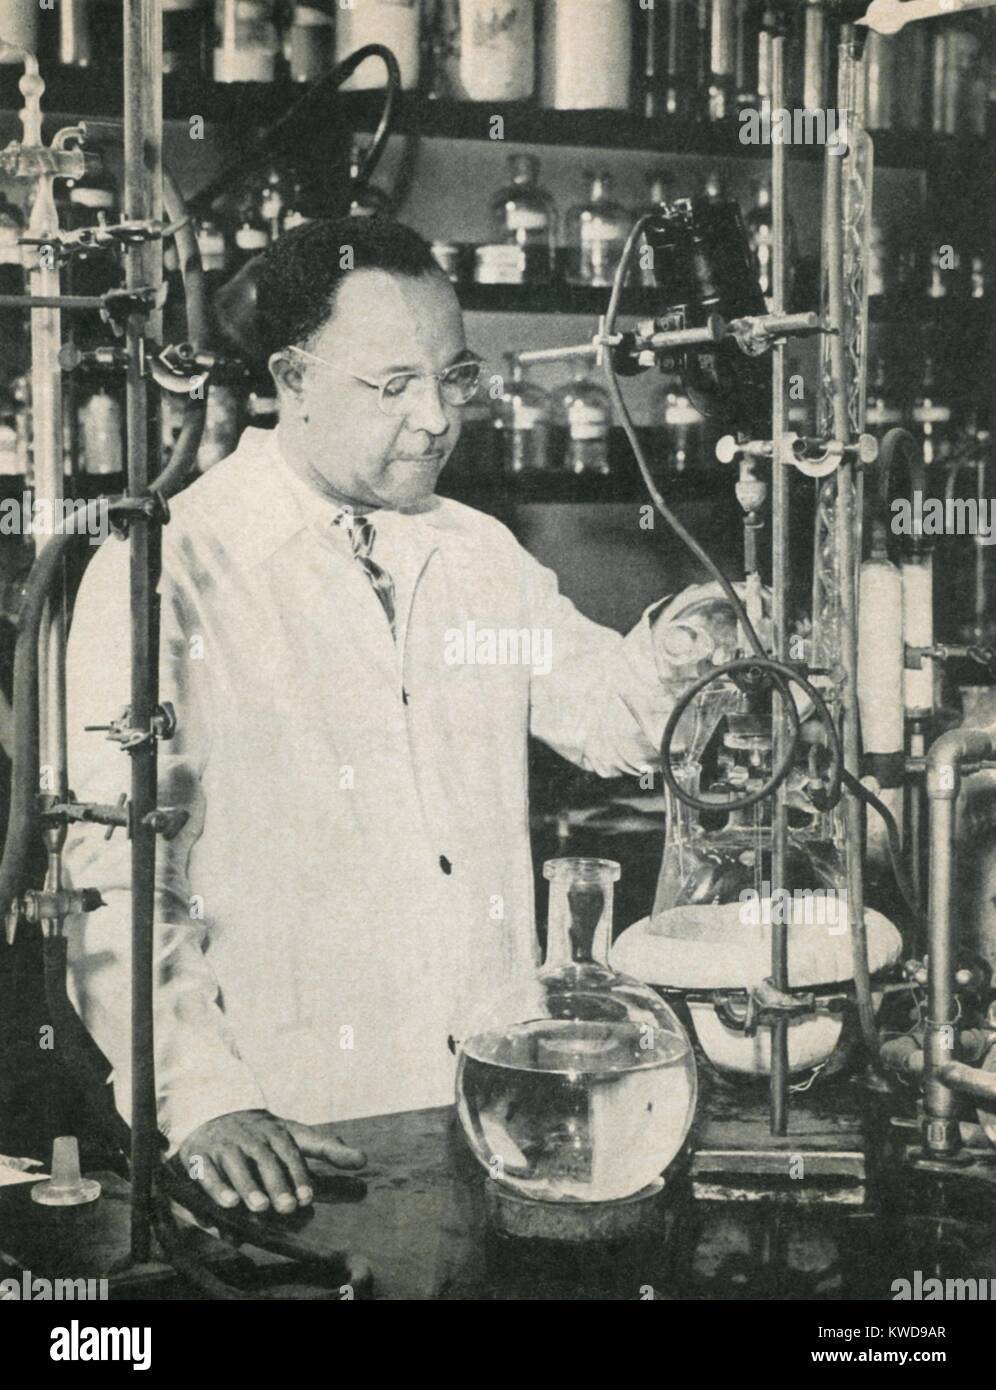 Percy Julian, African American chemist, c. 1940s. At the Glidden Company, he designed methods for extracting soy protein on an industrial scale. In the 1940s he developed processes for large scale manufacture of synthetic human hormones for medical use (BSLOC 2016 10 12) Stock Photo